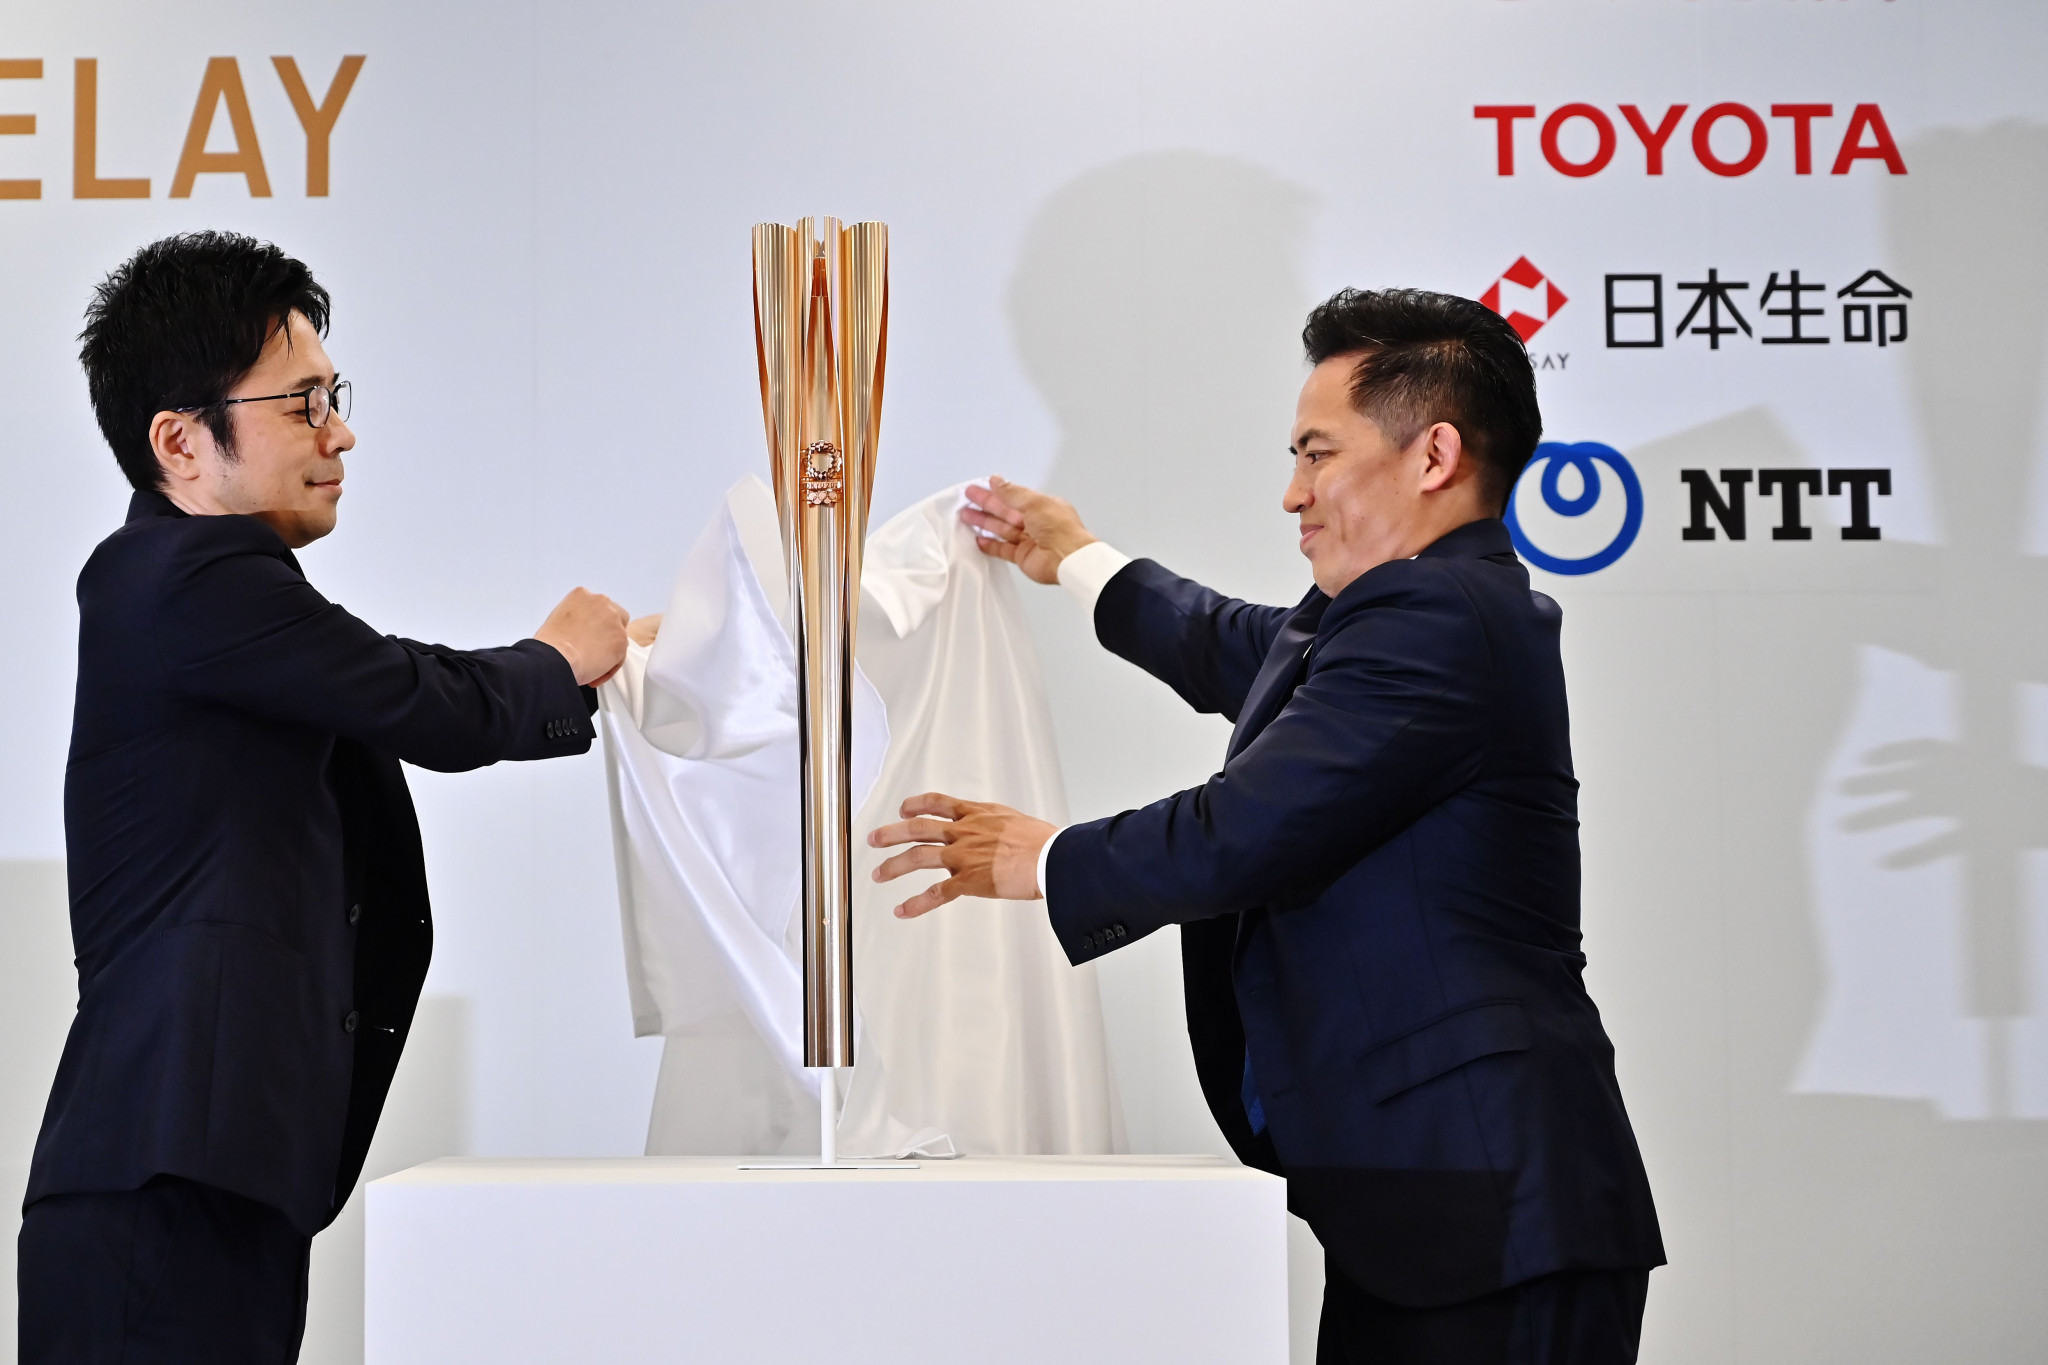 Designer Tokujin Yoshioka, left, and Torch Relay ambassador Tadahiro Nomura, right, unveil the Tokyo 2020 Olympic Torch ©Getty Images